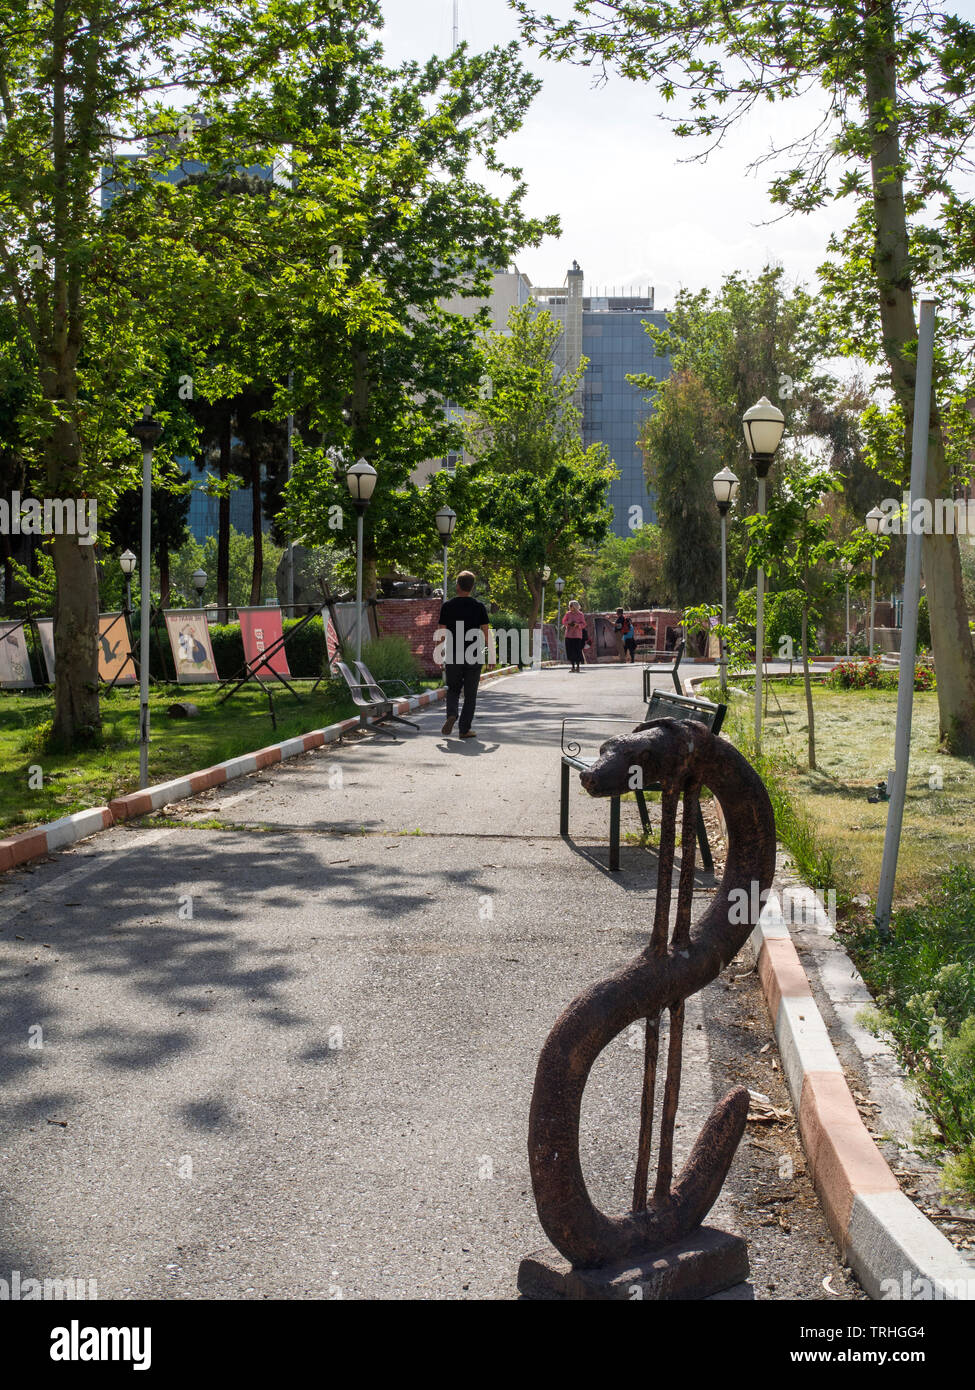 A dollar snake statue at the Museum- Garden of Anti Arrogance, the former embassy of America, in Tehran. The embassy was seized after diplomatic relat Stock Photo